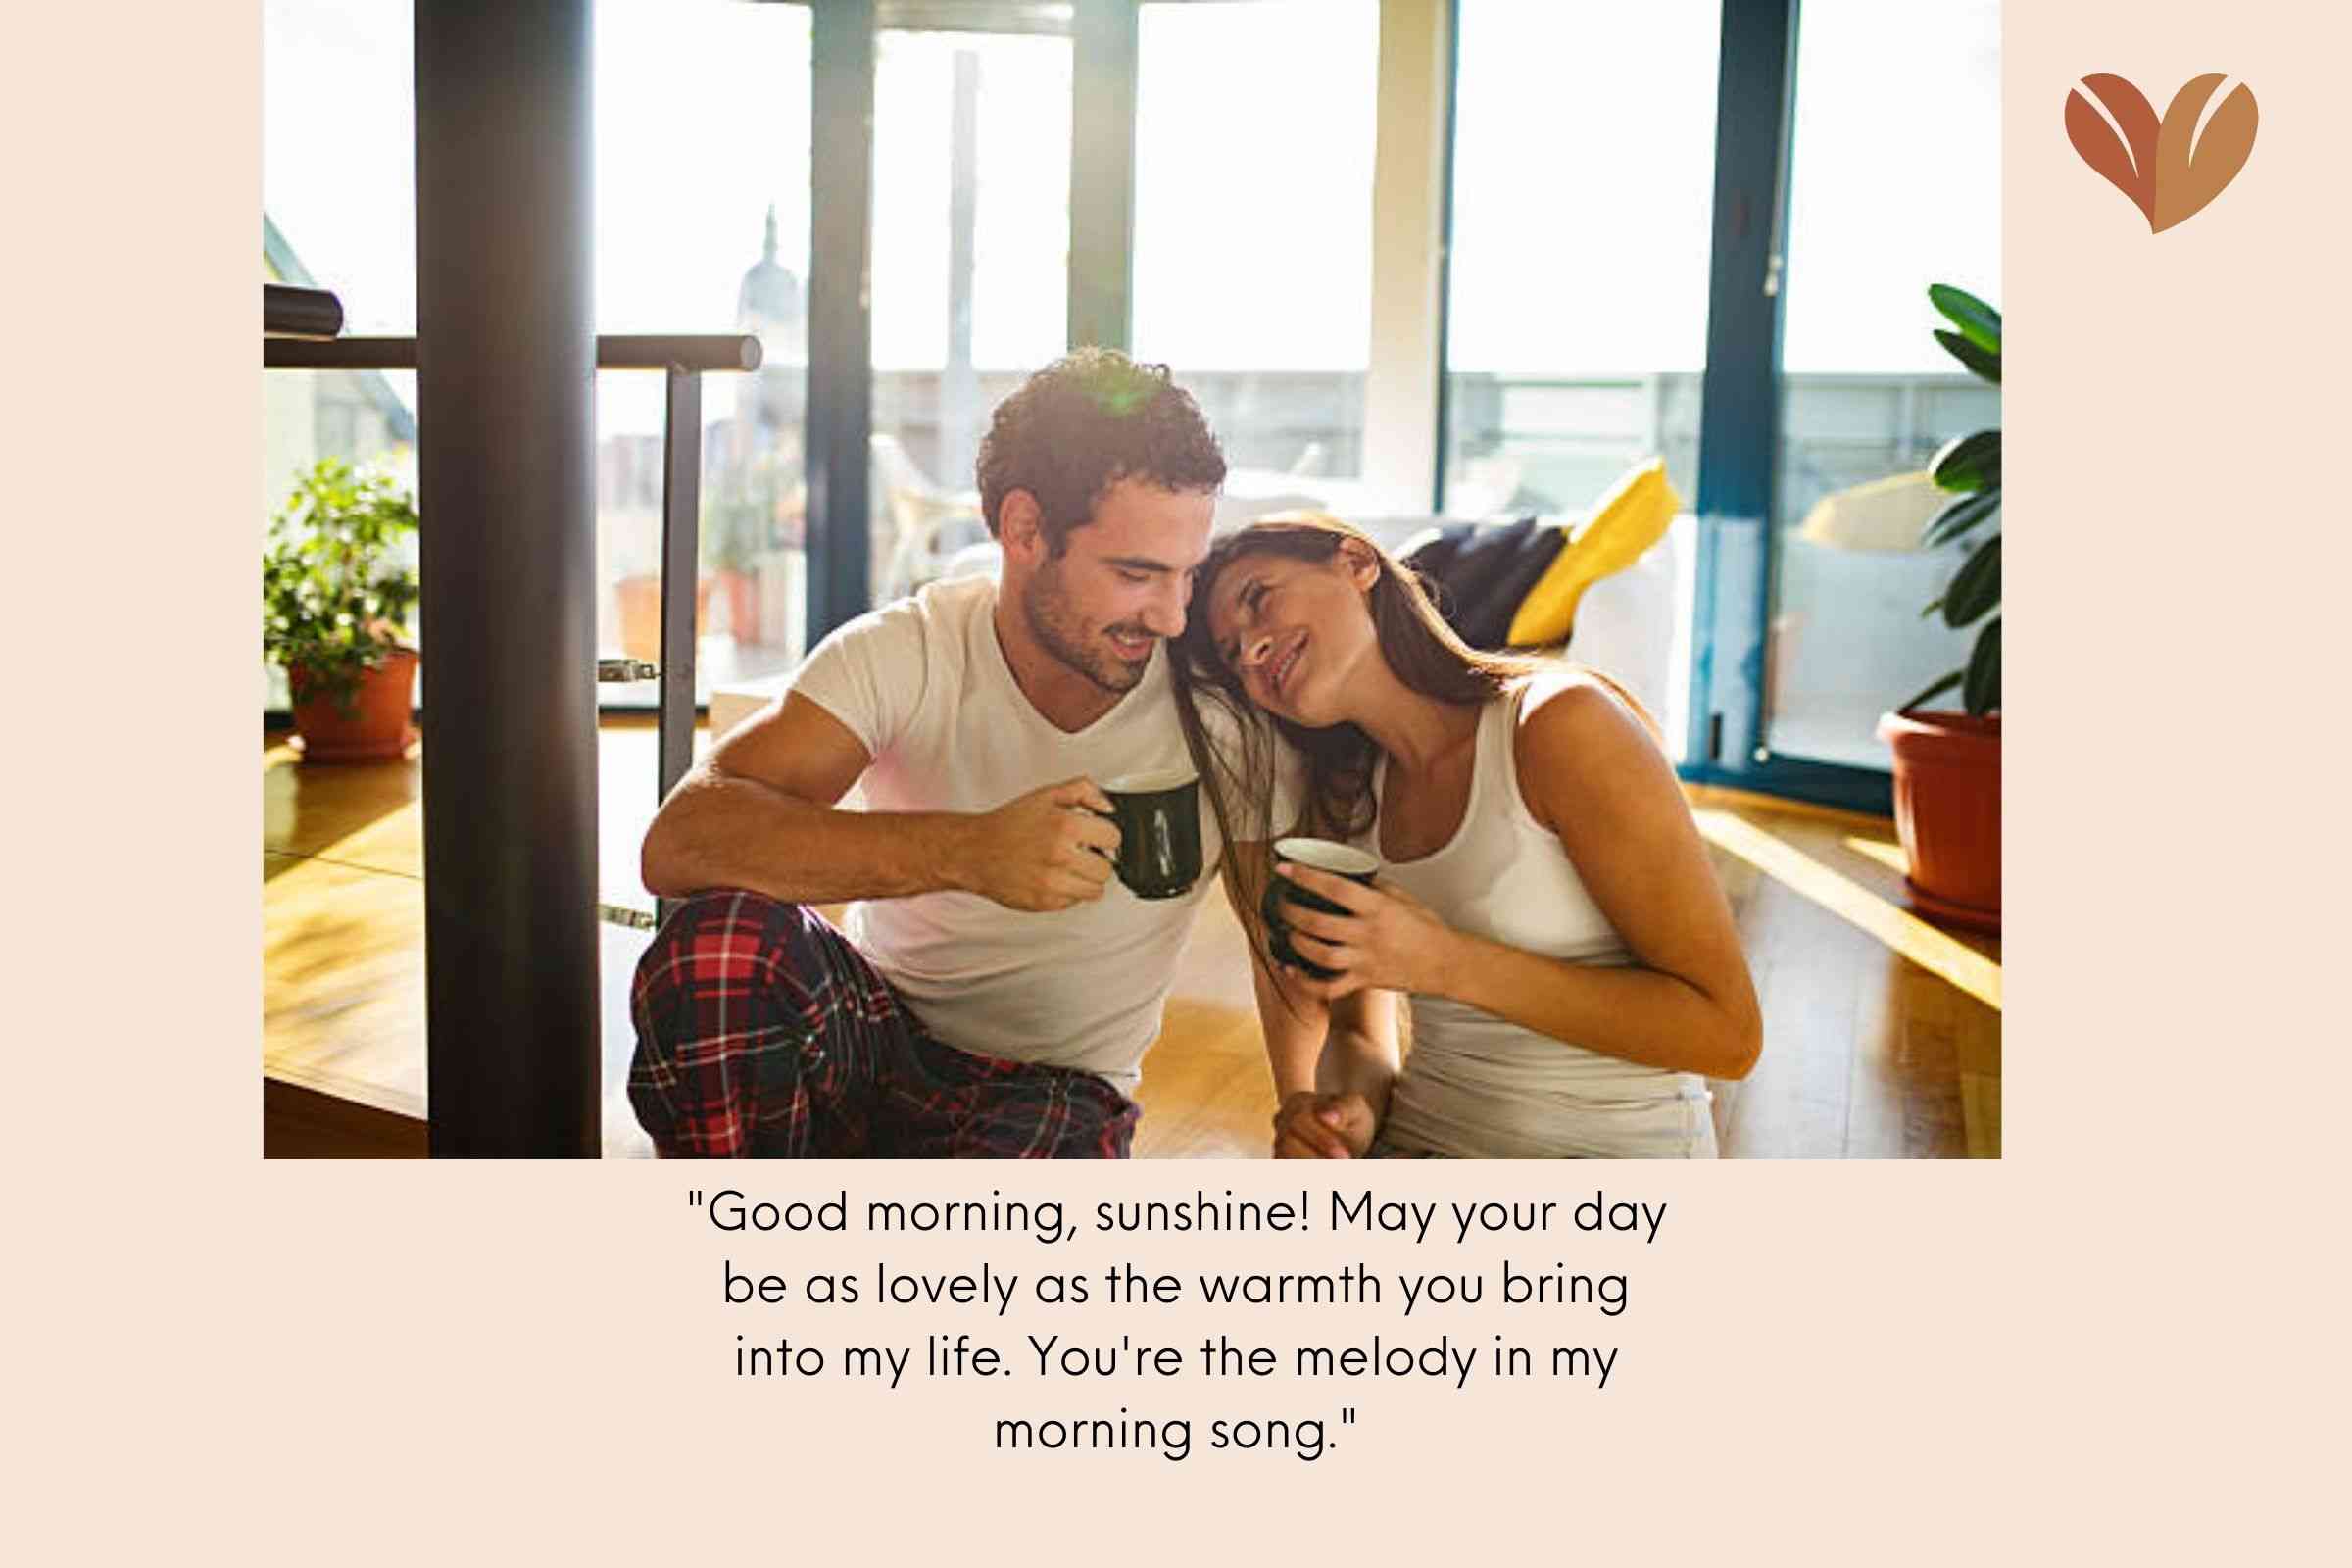 "Good morning, sunshine! May your day be as lovely as the warmth you bring into my life. You're the melody in my morning song."